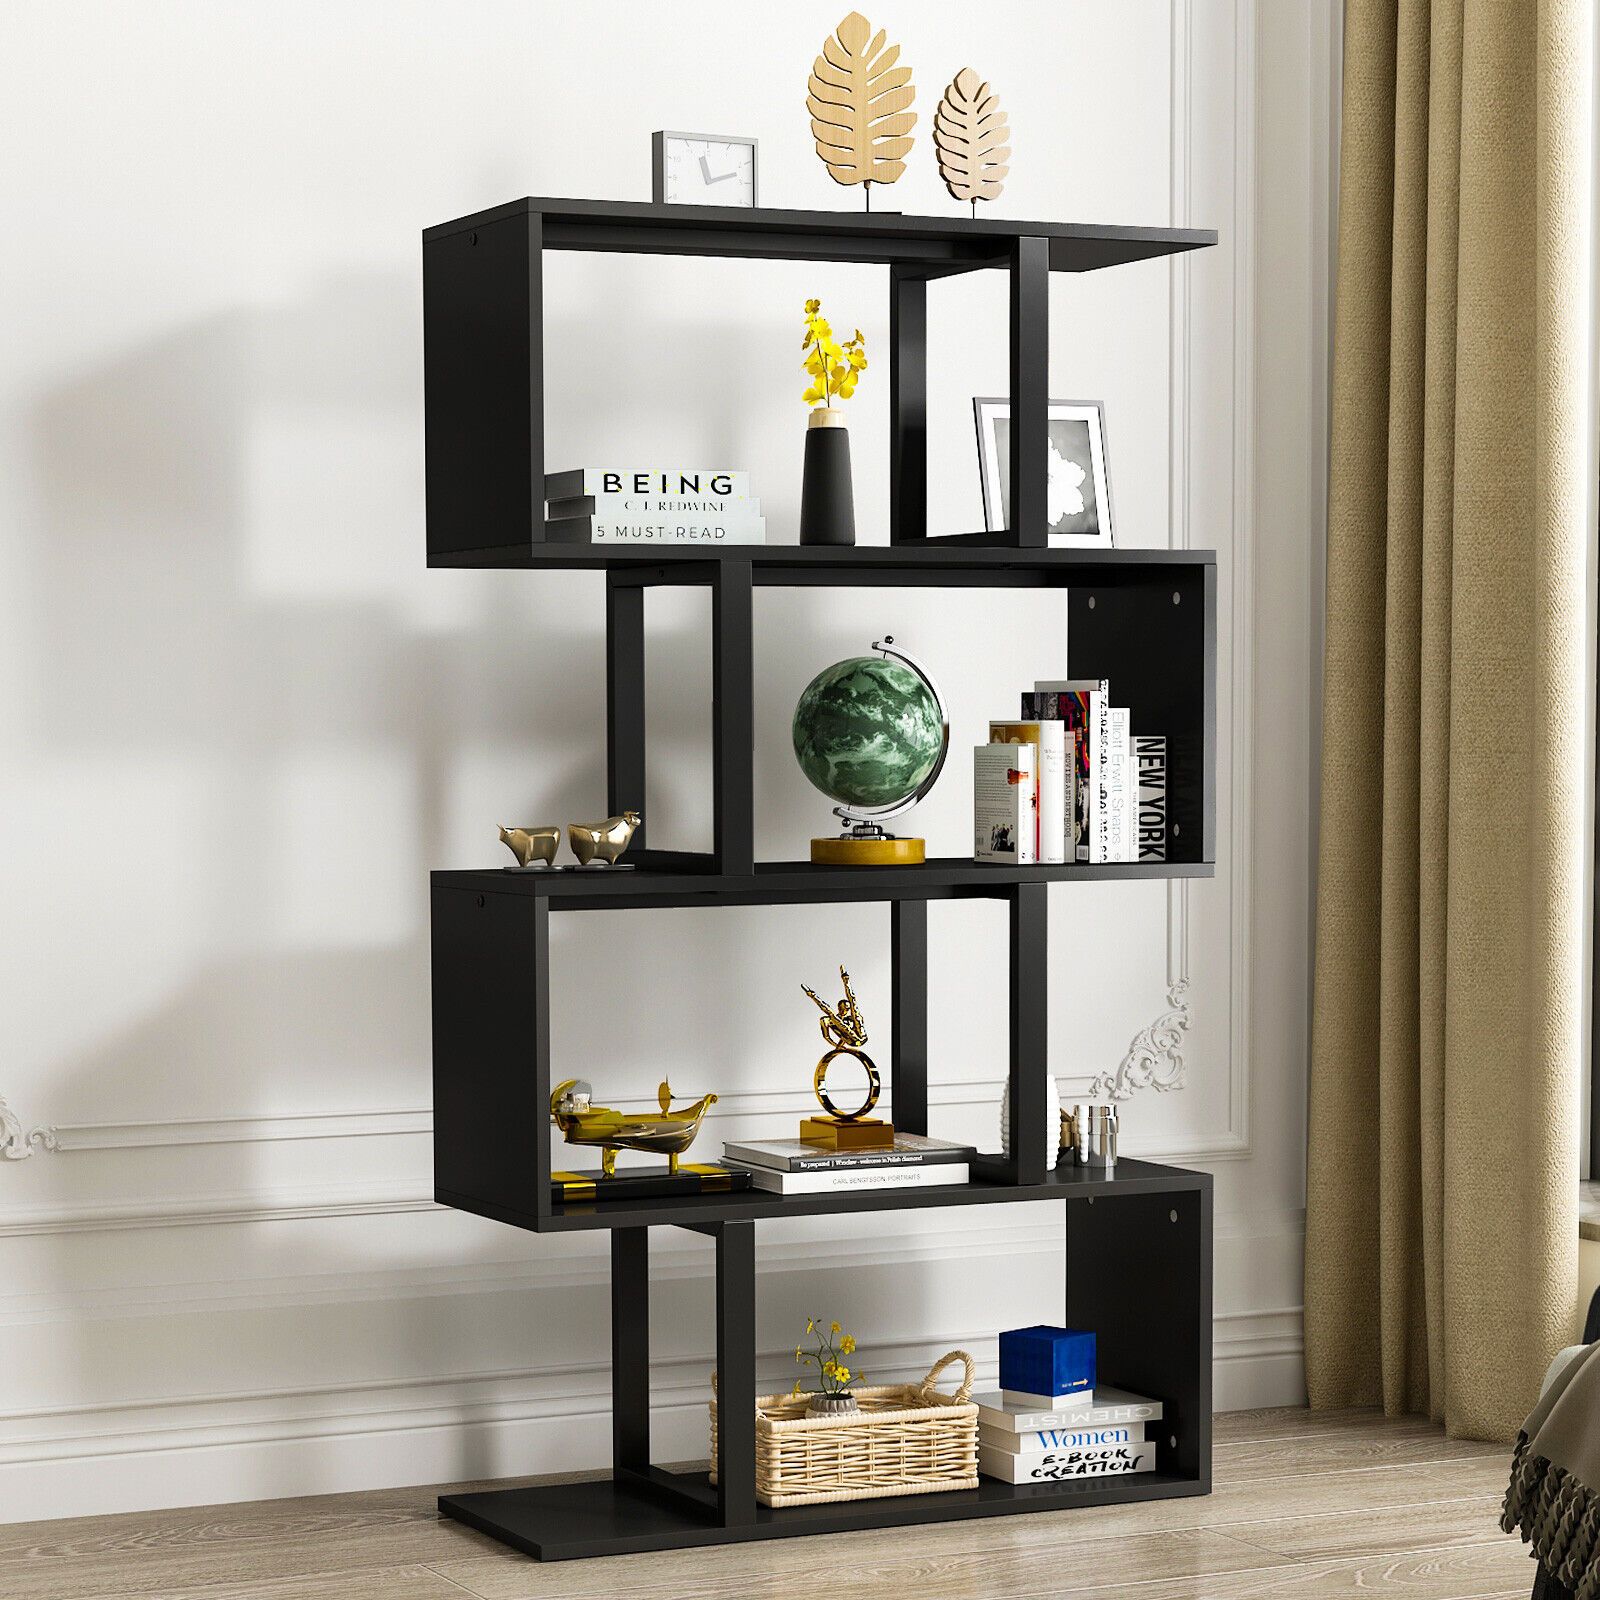 Yitahome 5 Tier Bookshelf S Shaped Z Shelf Bookshelves Bookcase Storage  Shelving | Ebay Within Bookcases With Five Shelves (View 13 of 15)